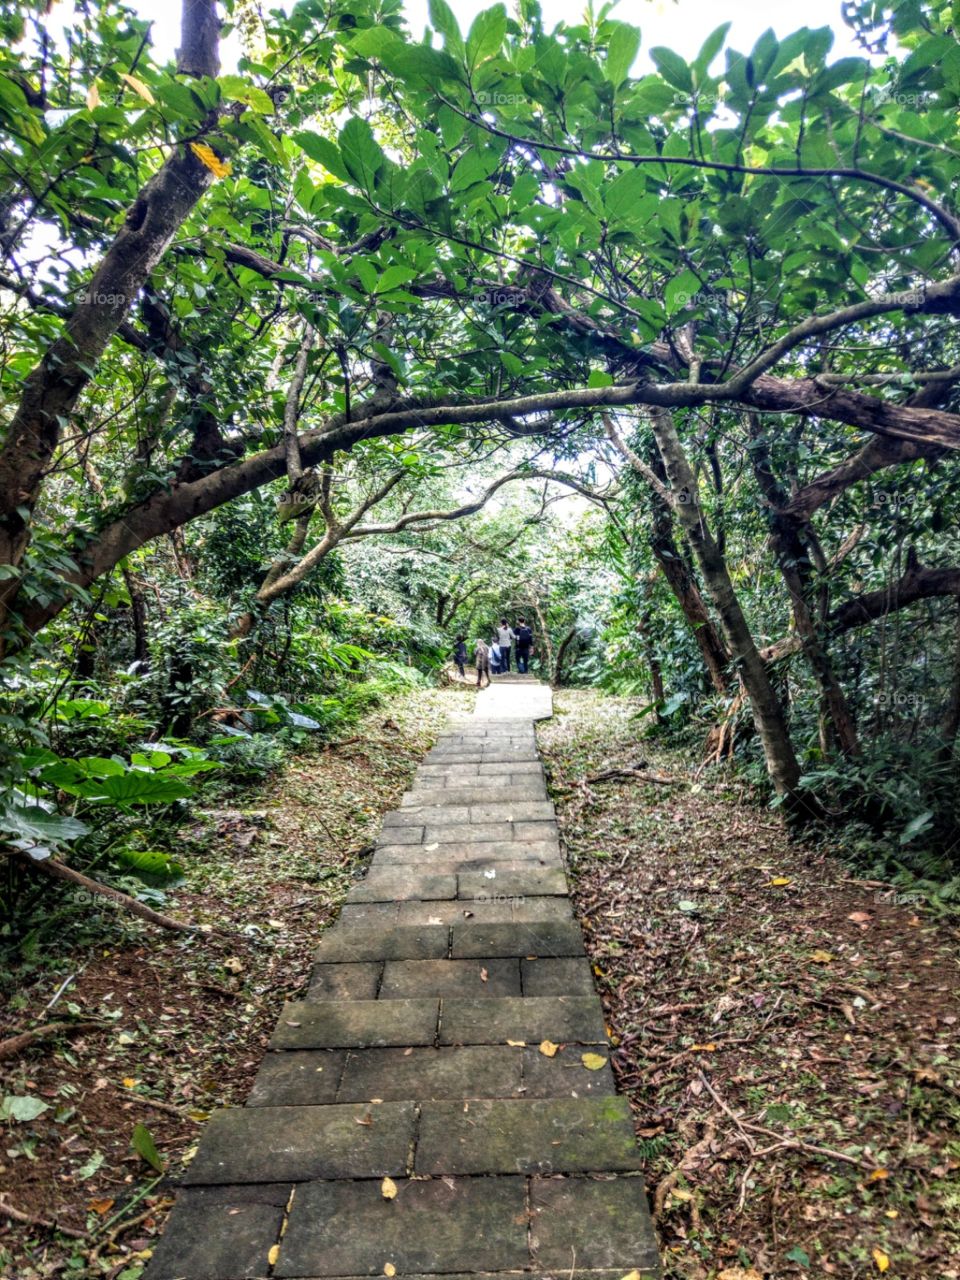 The mountain trail of the Turtle Island,
that has 1700 steps, made of stones, watch good views of mountain, sea and many plants, also as a ecotourism.